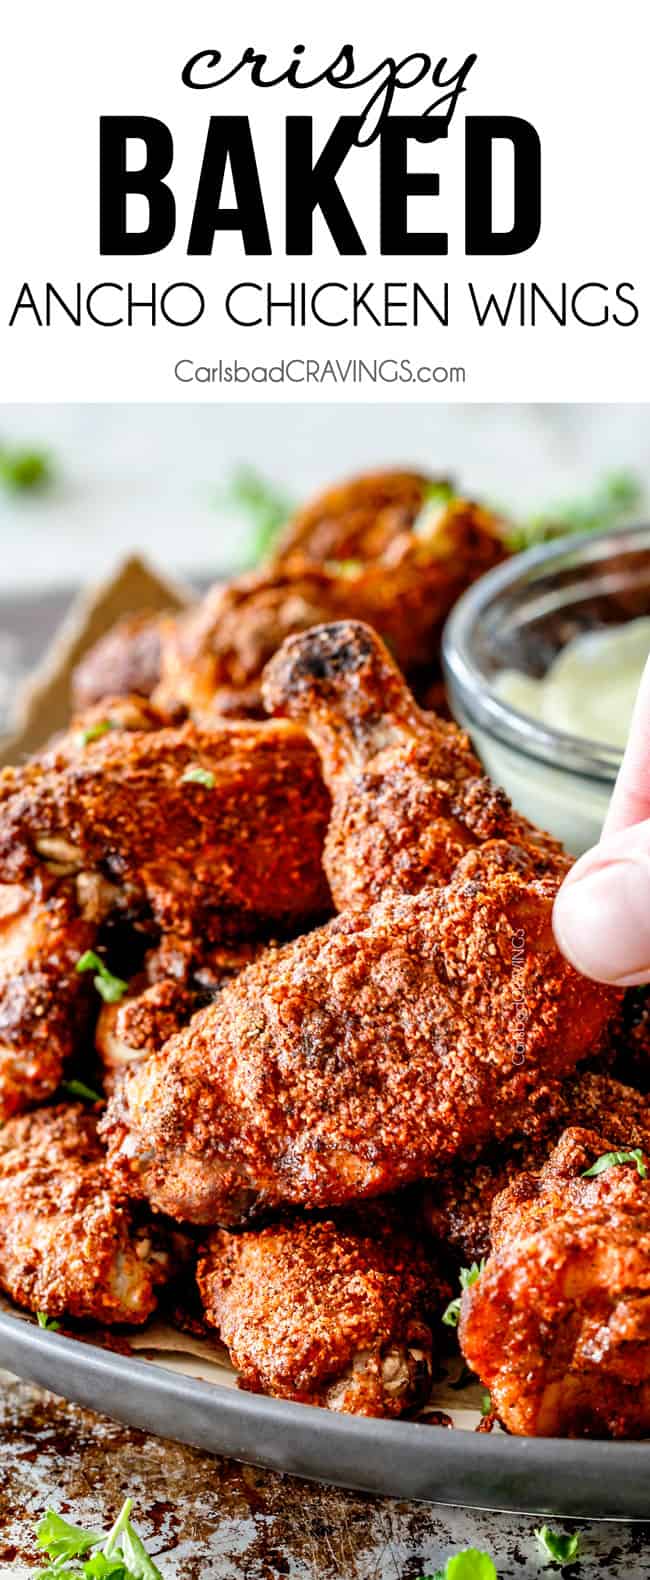 Ancho Baked Chicken Wings